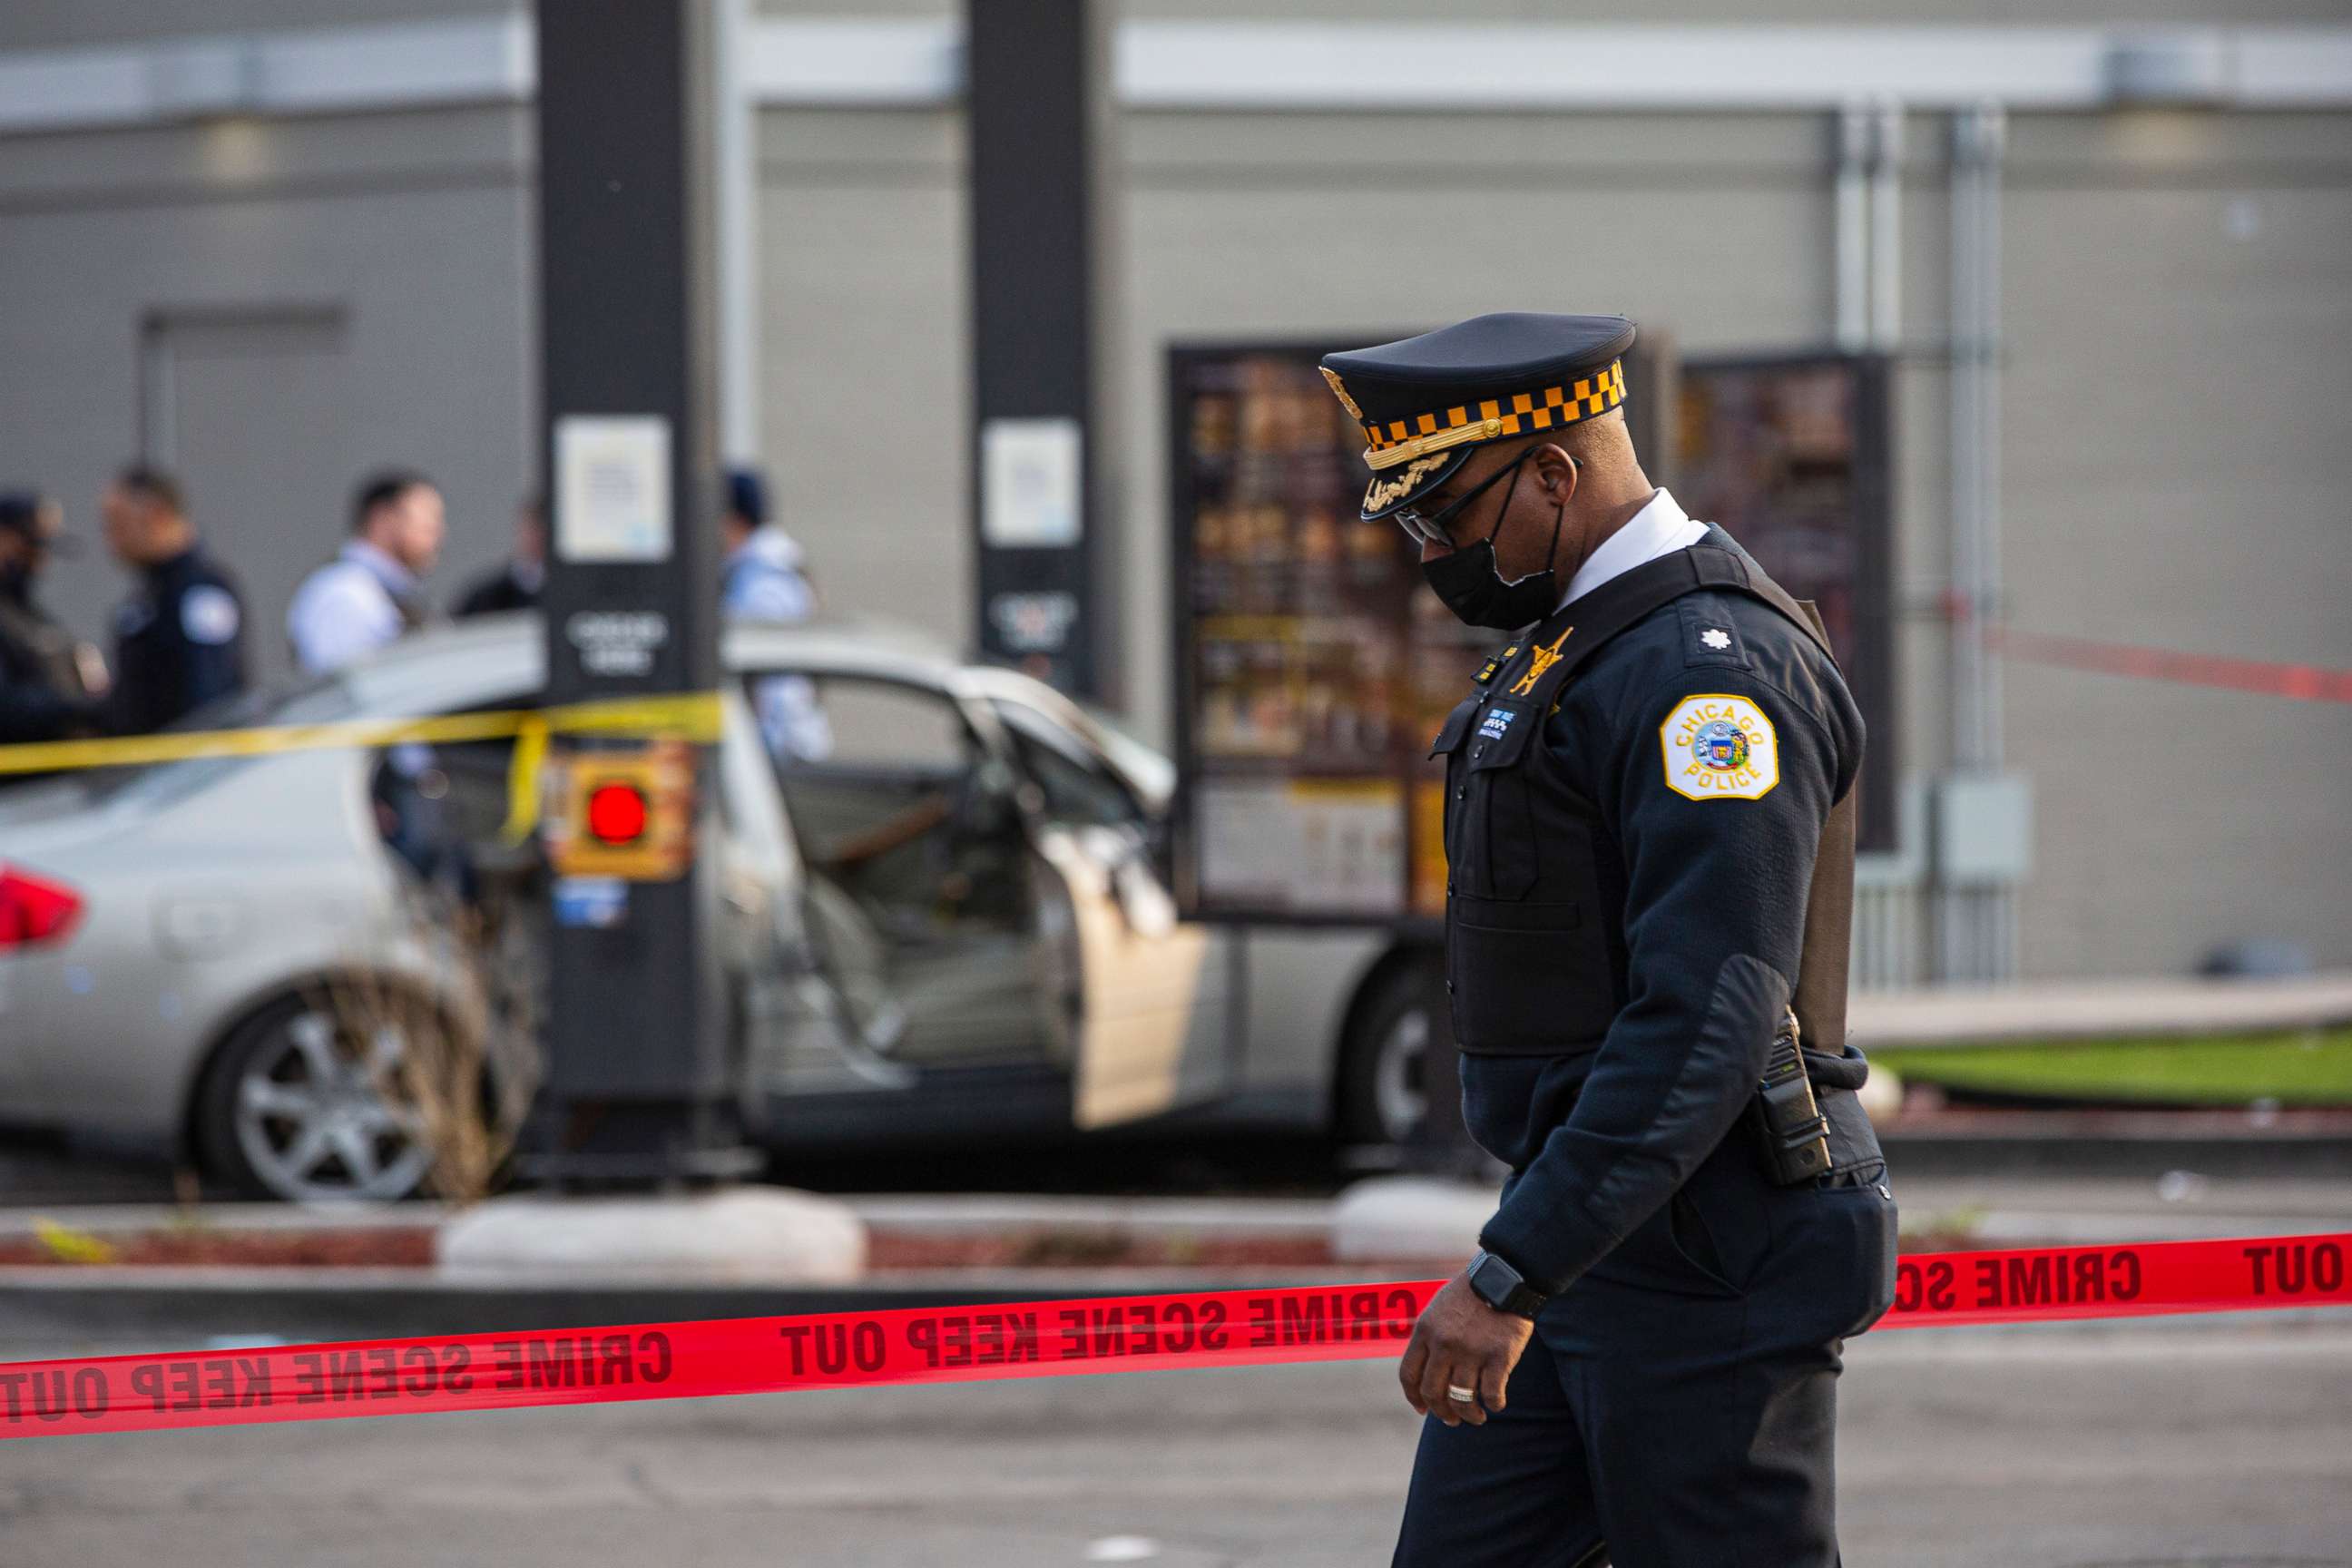 PHOTO: A police commander walks by as police investigate a crime scene where Jontae Adams, 28, and his daughter Jaslyn, 7, where shot, resulting in Jaslyn's death at a McDonald's drive-thru, April 18, 2021, in Chicago.